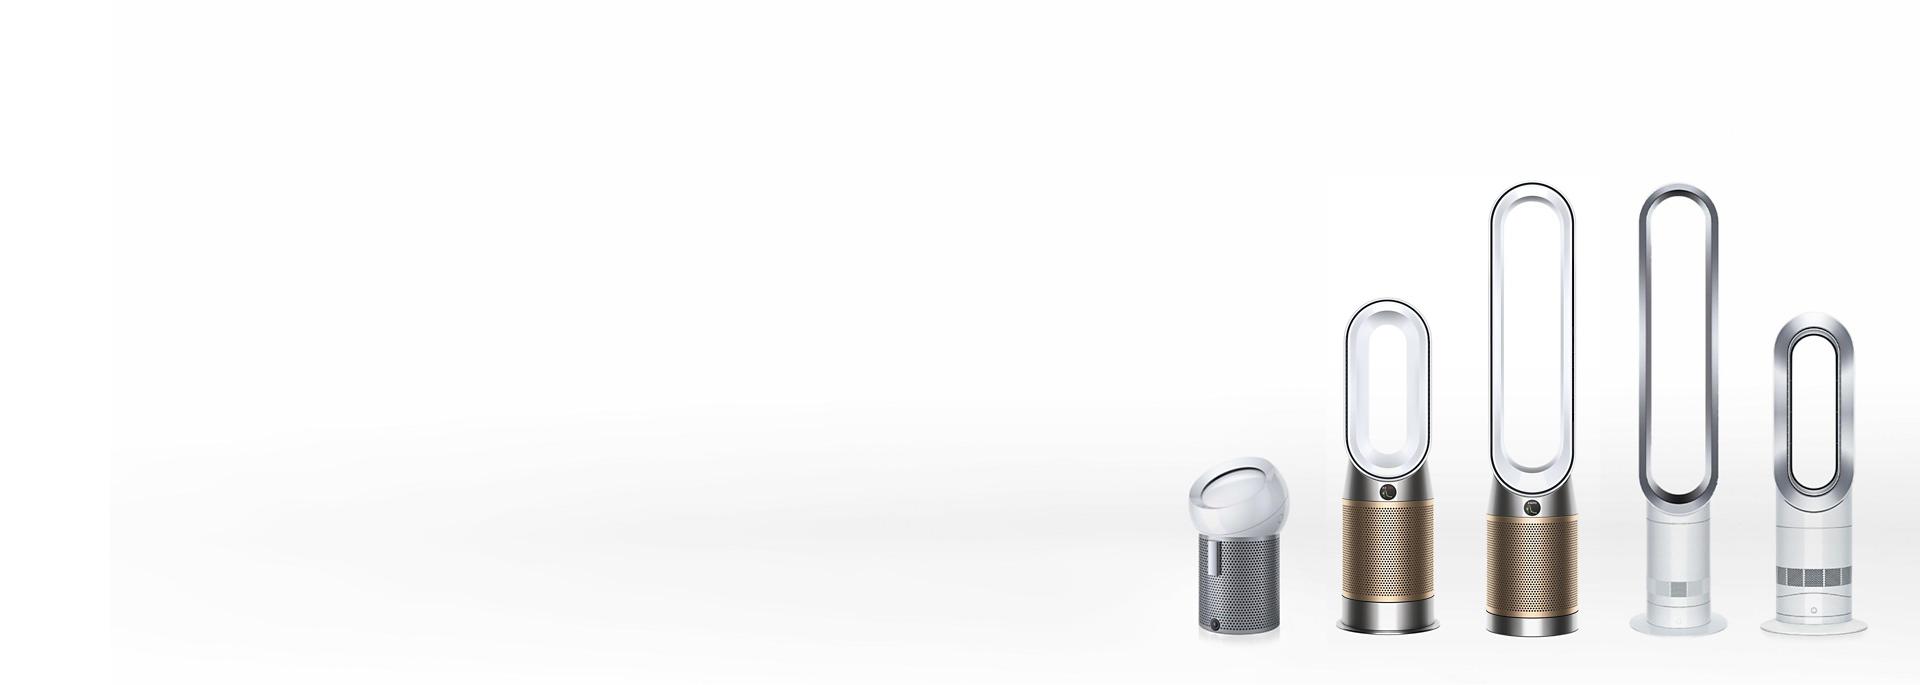 Dyson purifiers, humidifiers, heaters and fans